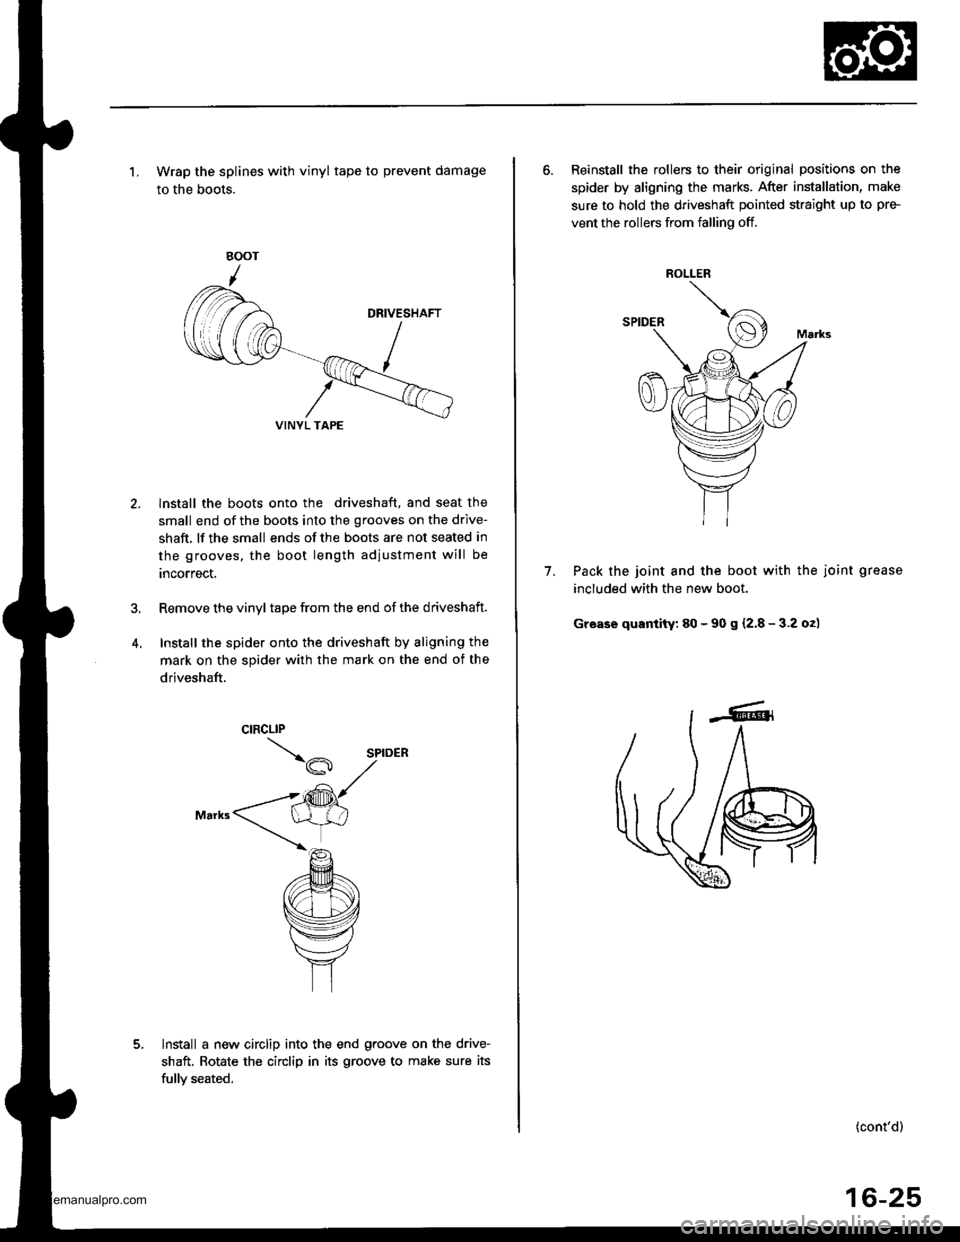 HONDA CR-V 1999 RD1-RD3 / 1.G User Guide 
1. Wrap the splines with vinyl tape to prevent damage
to the boots.
lnstall the boots onto the driveshaft, and seat the
small end of the boots into the grooves on the drive-
shaft, lf the small ends